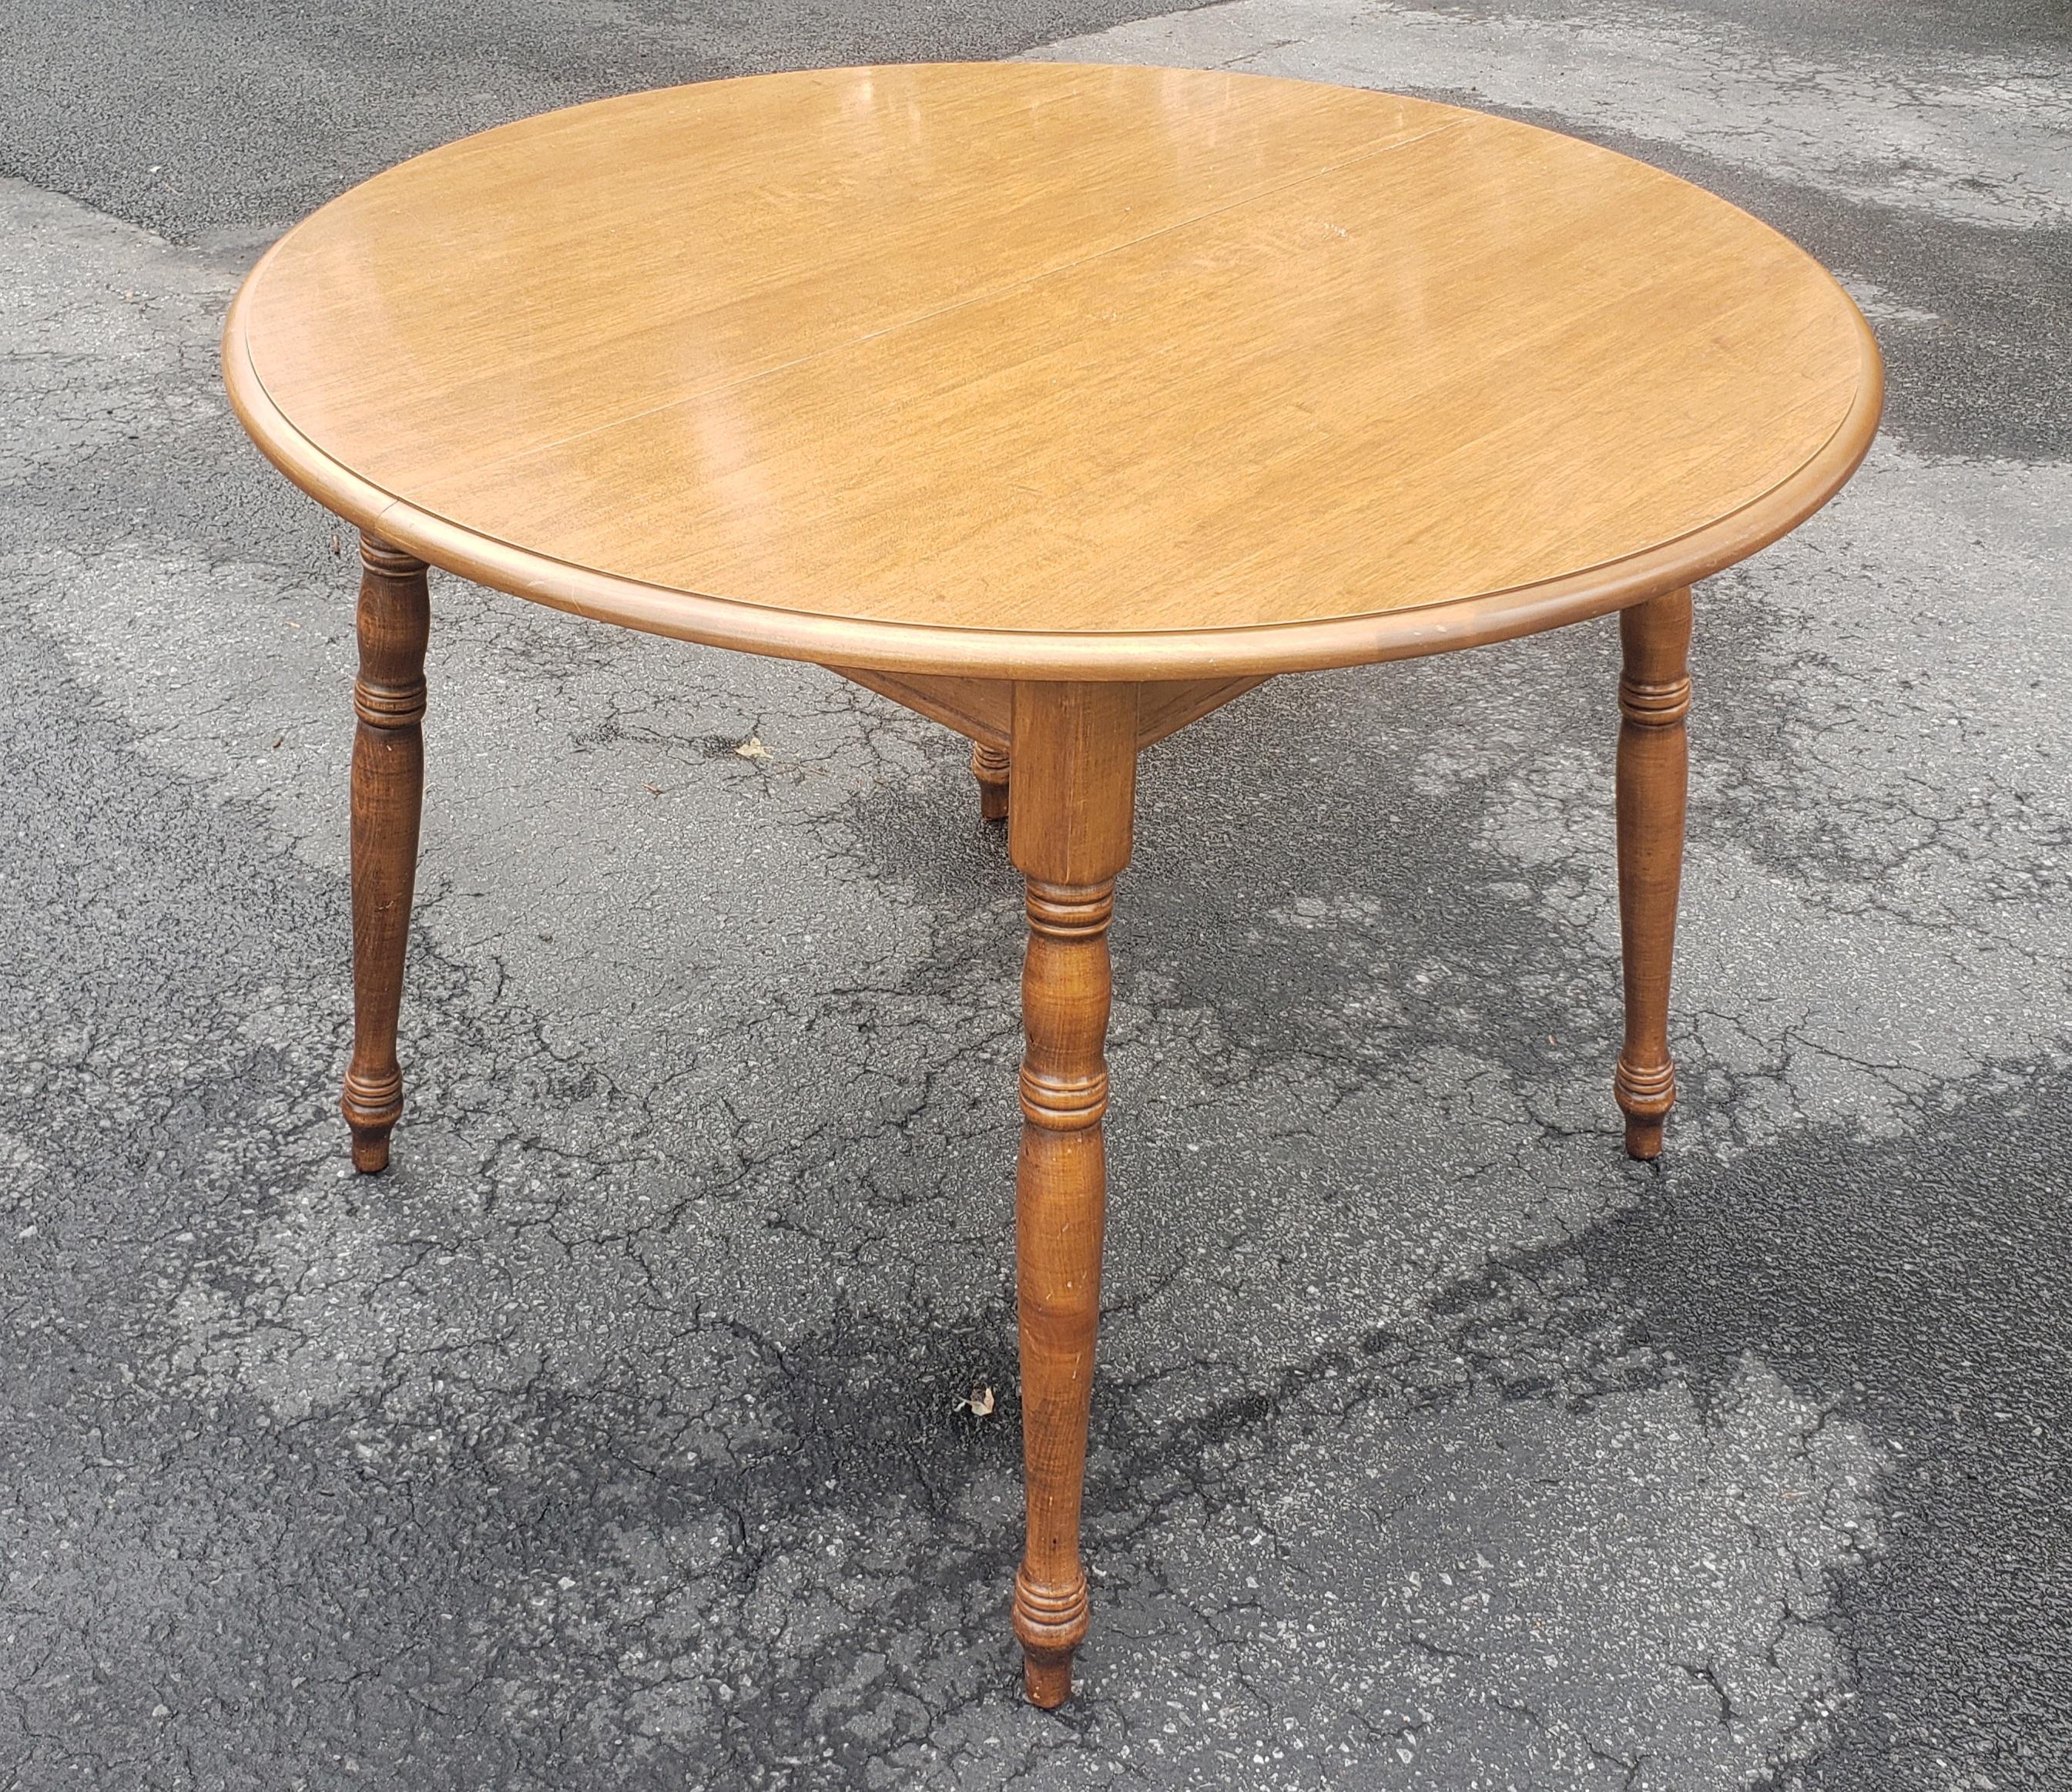 Laminated Early American Style Maple Small Dining or Kitchen Table For Sale